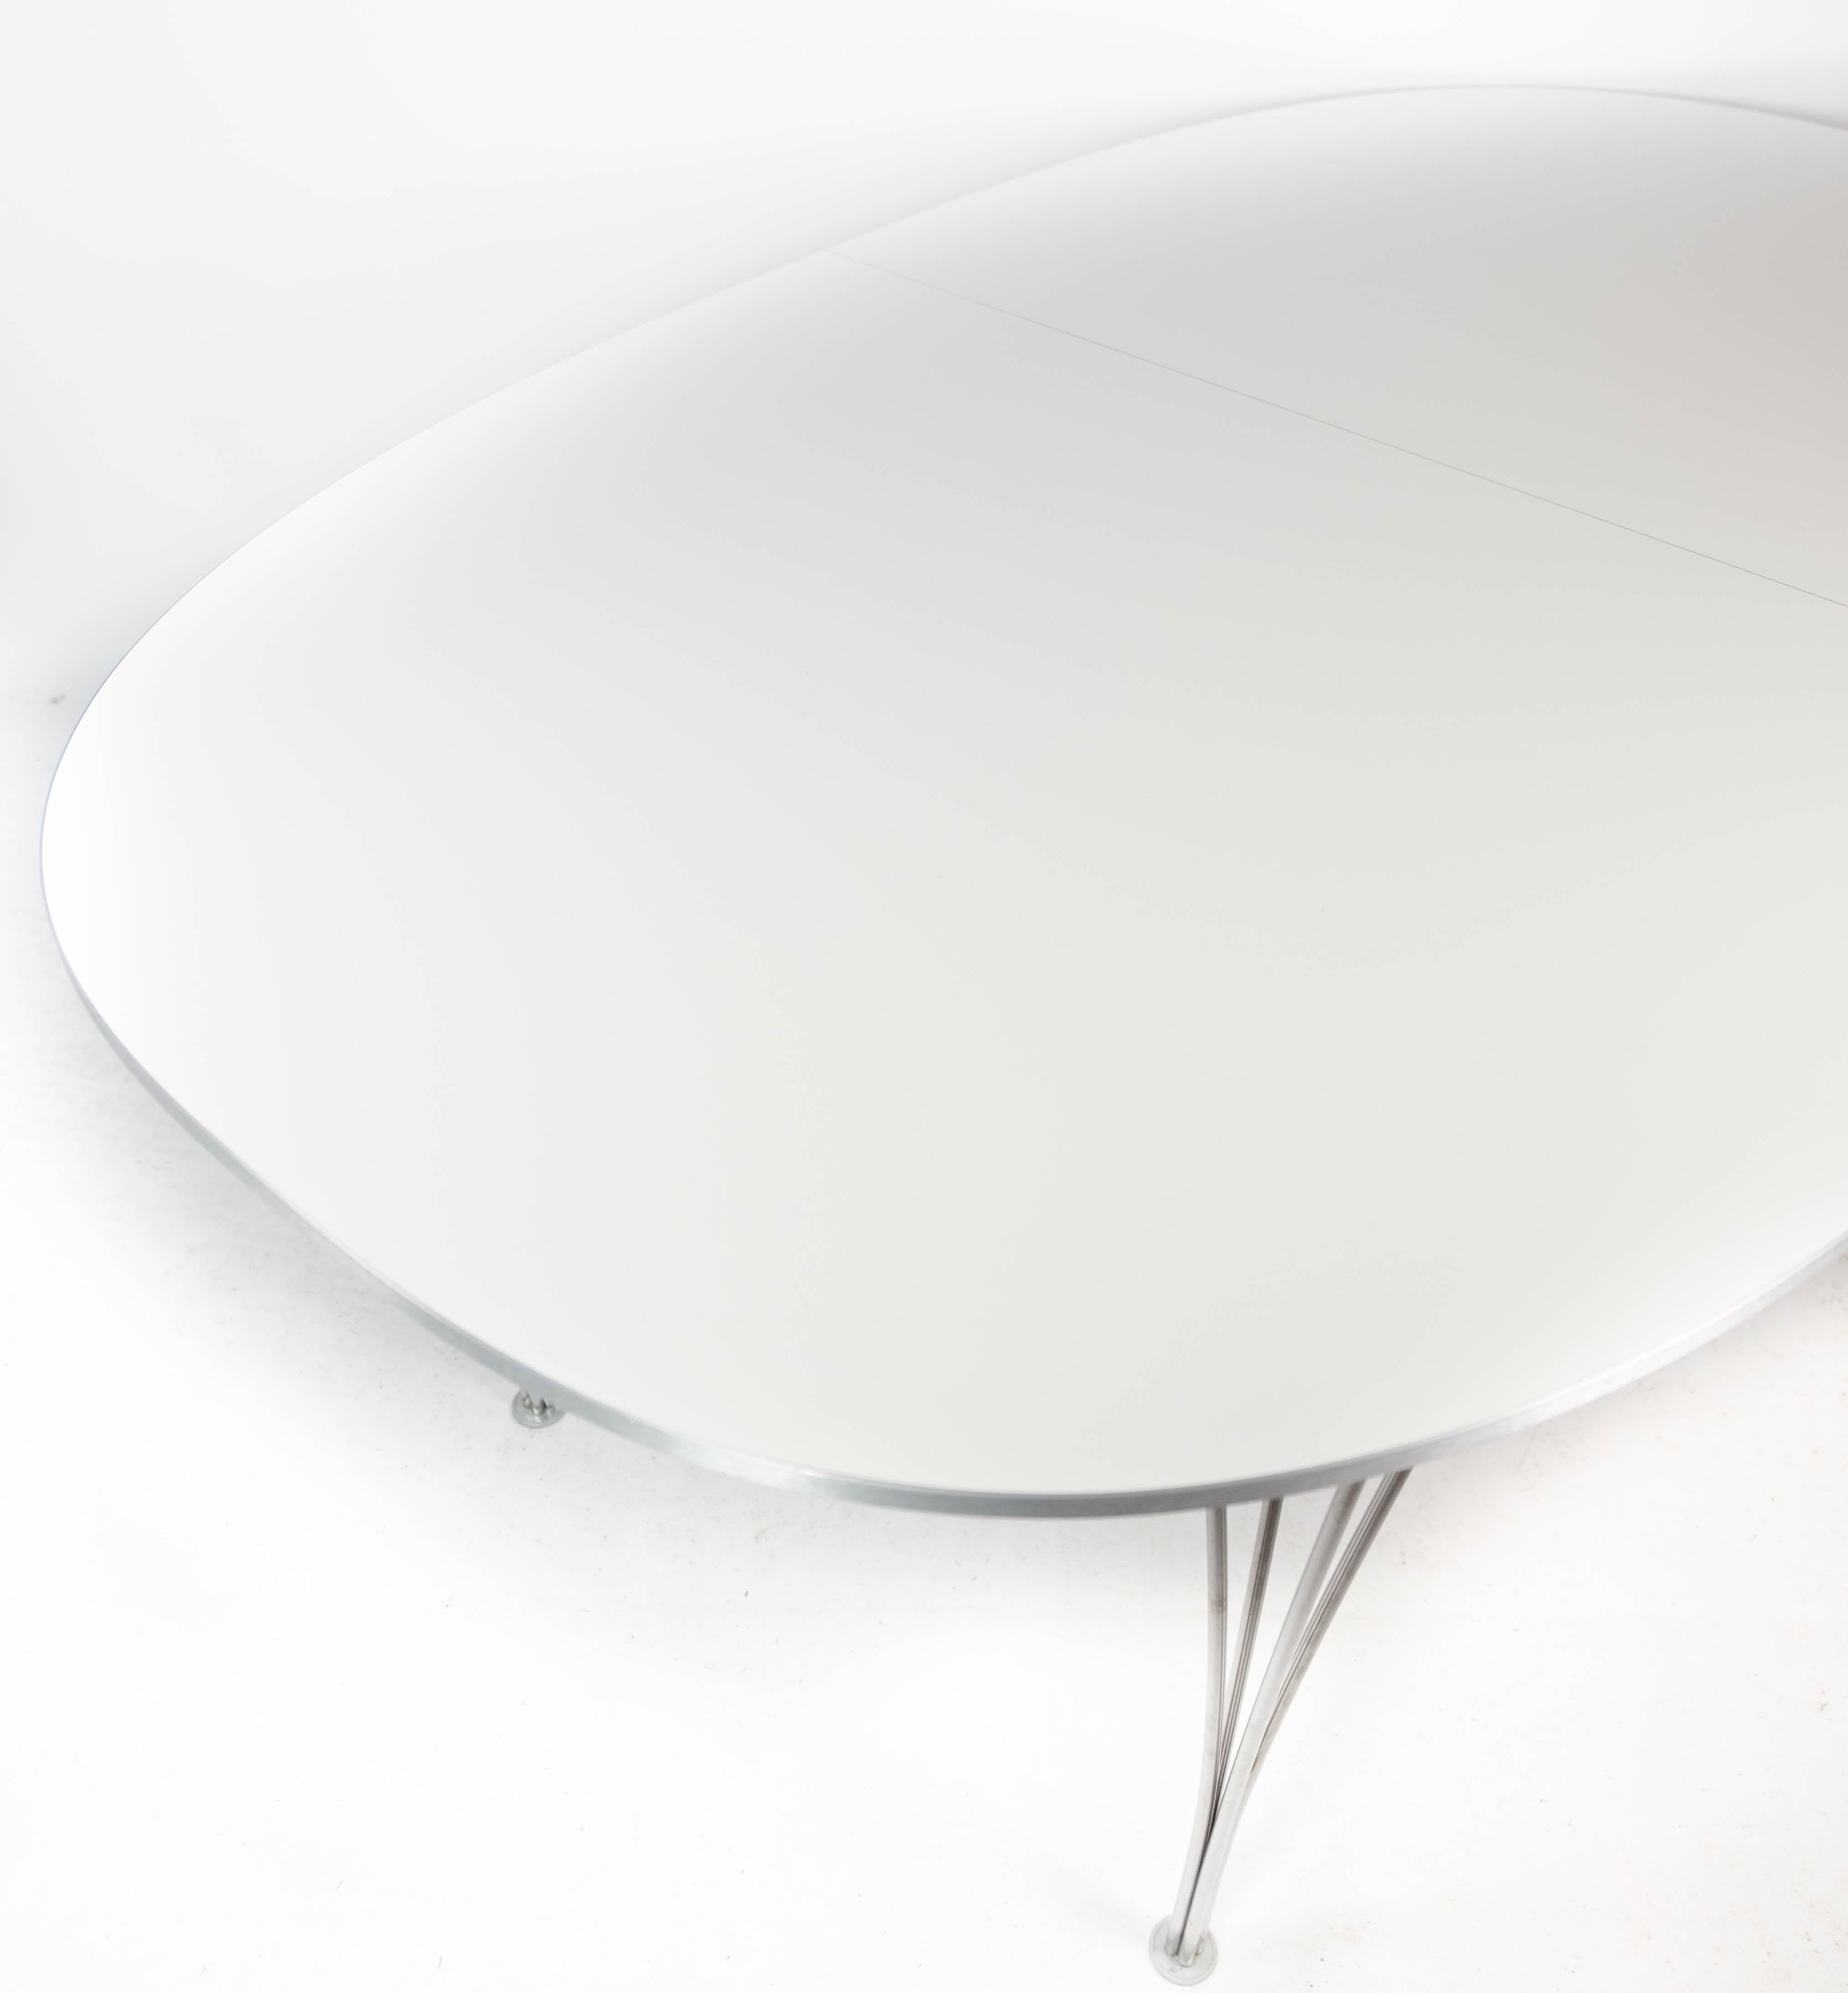 Super Ellipse Dining Table With White Laminate Designed By Piet Hein From 2011 In Good Condition For Sale In Lejre, DK